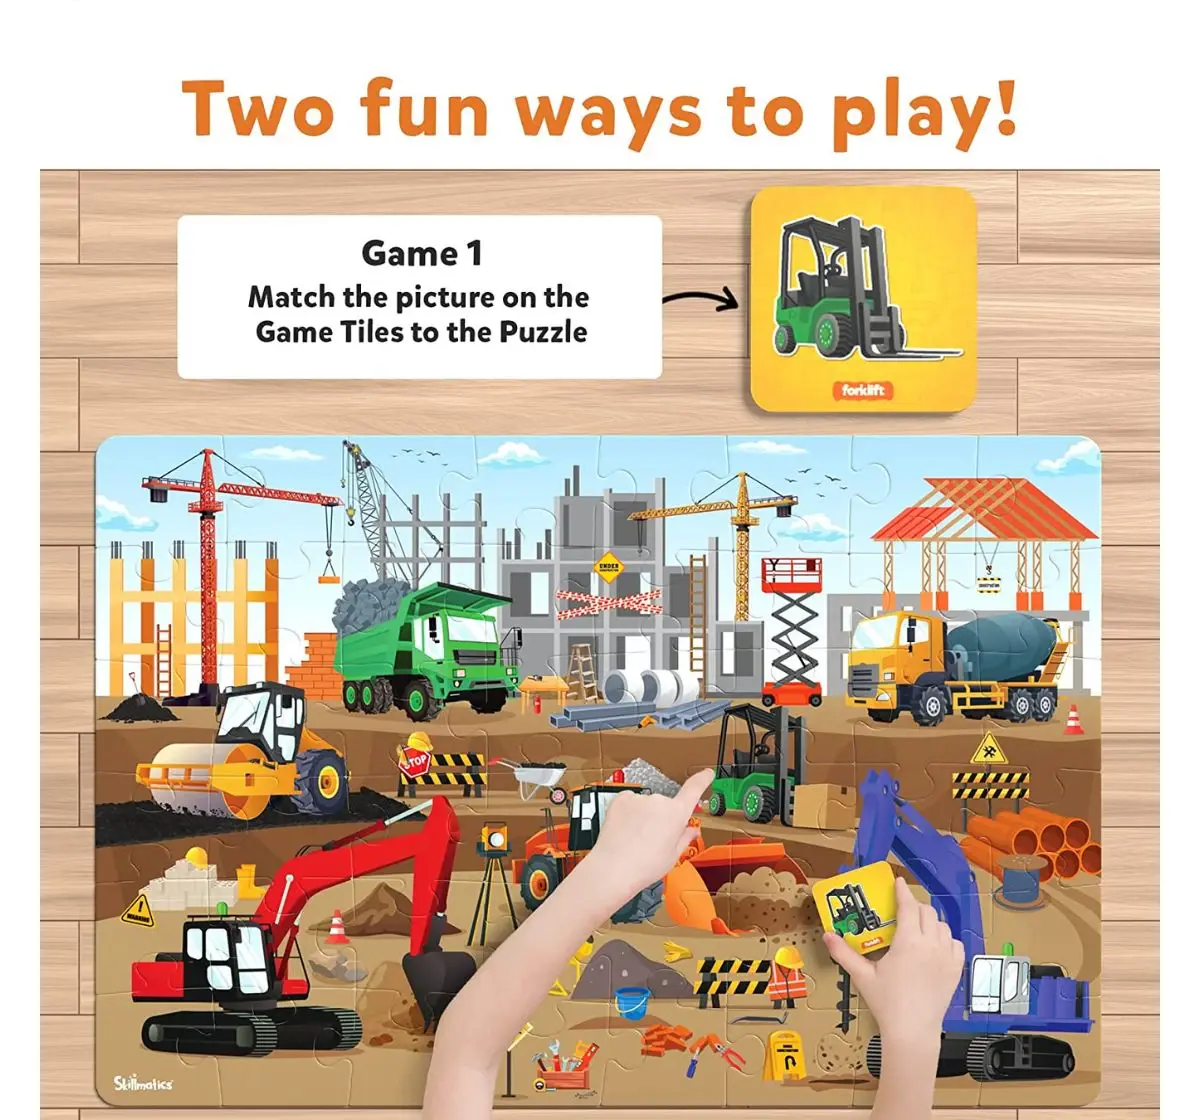 Skillmatics Floor Puzzle & Game - Piece & Play Construction Site, Jigsaw Puzzle, Kids for 3Y+, Multicolour